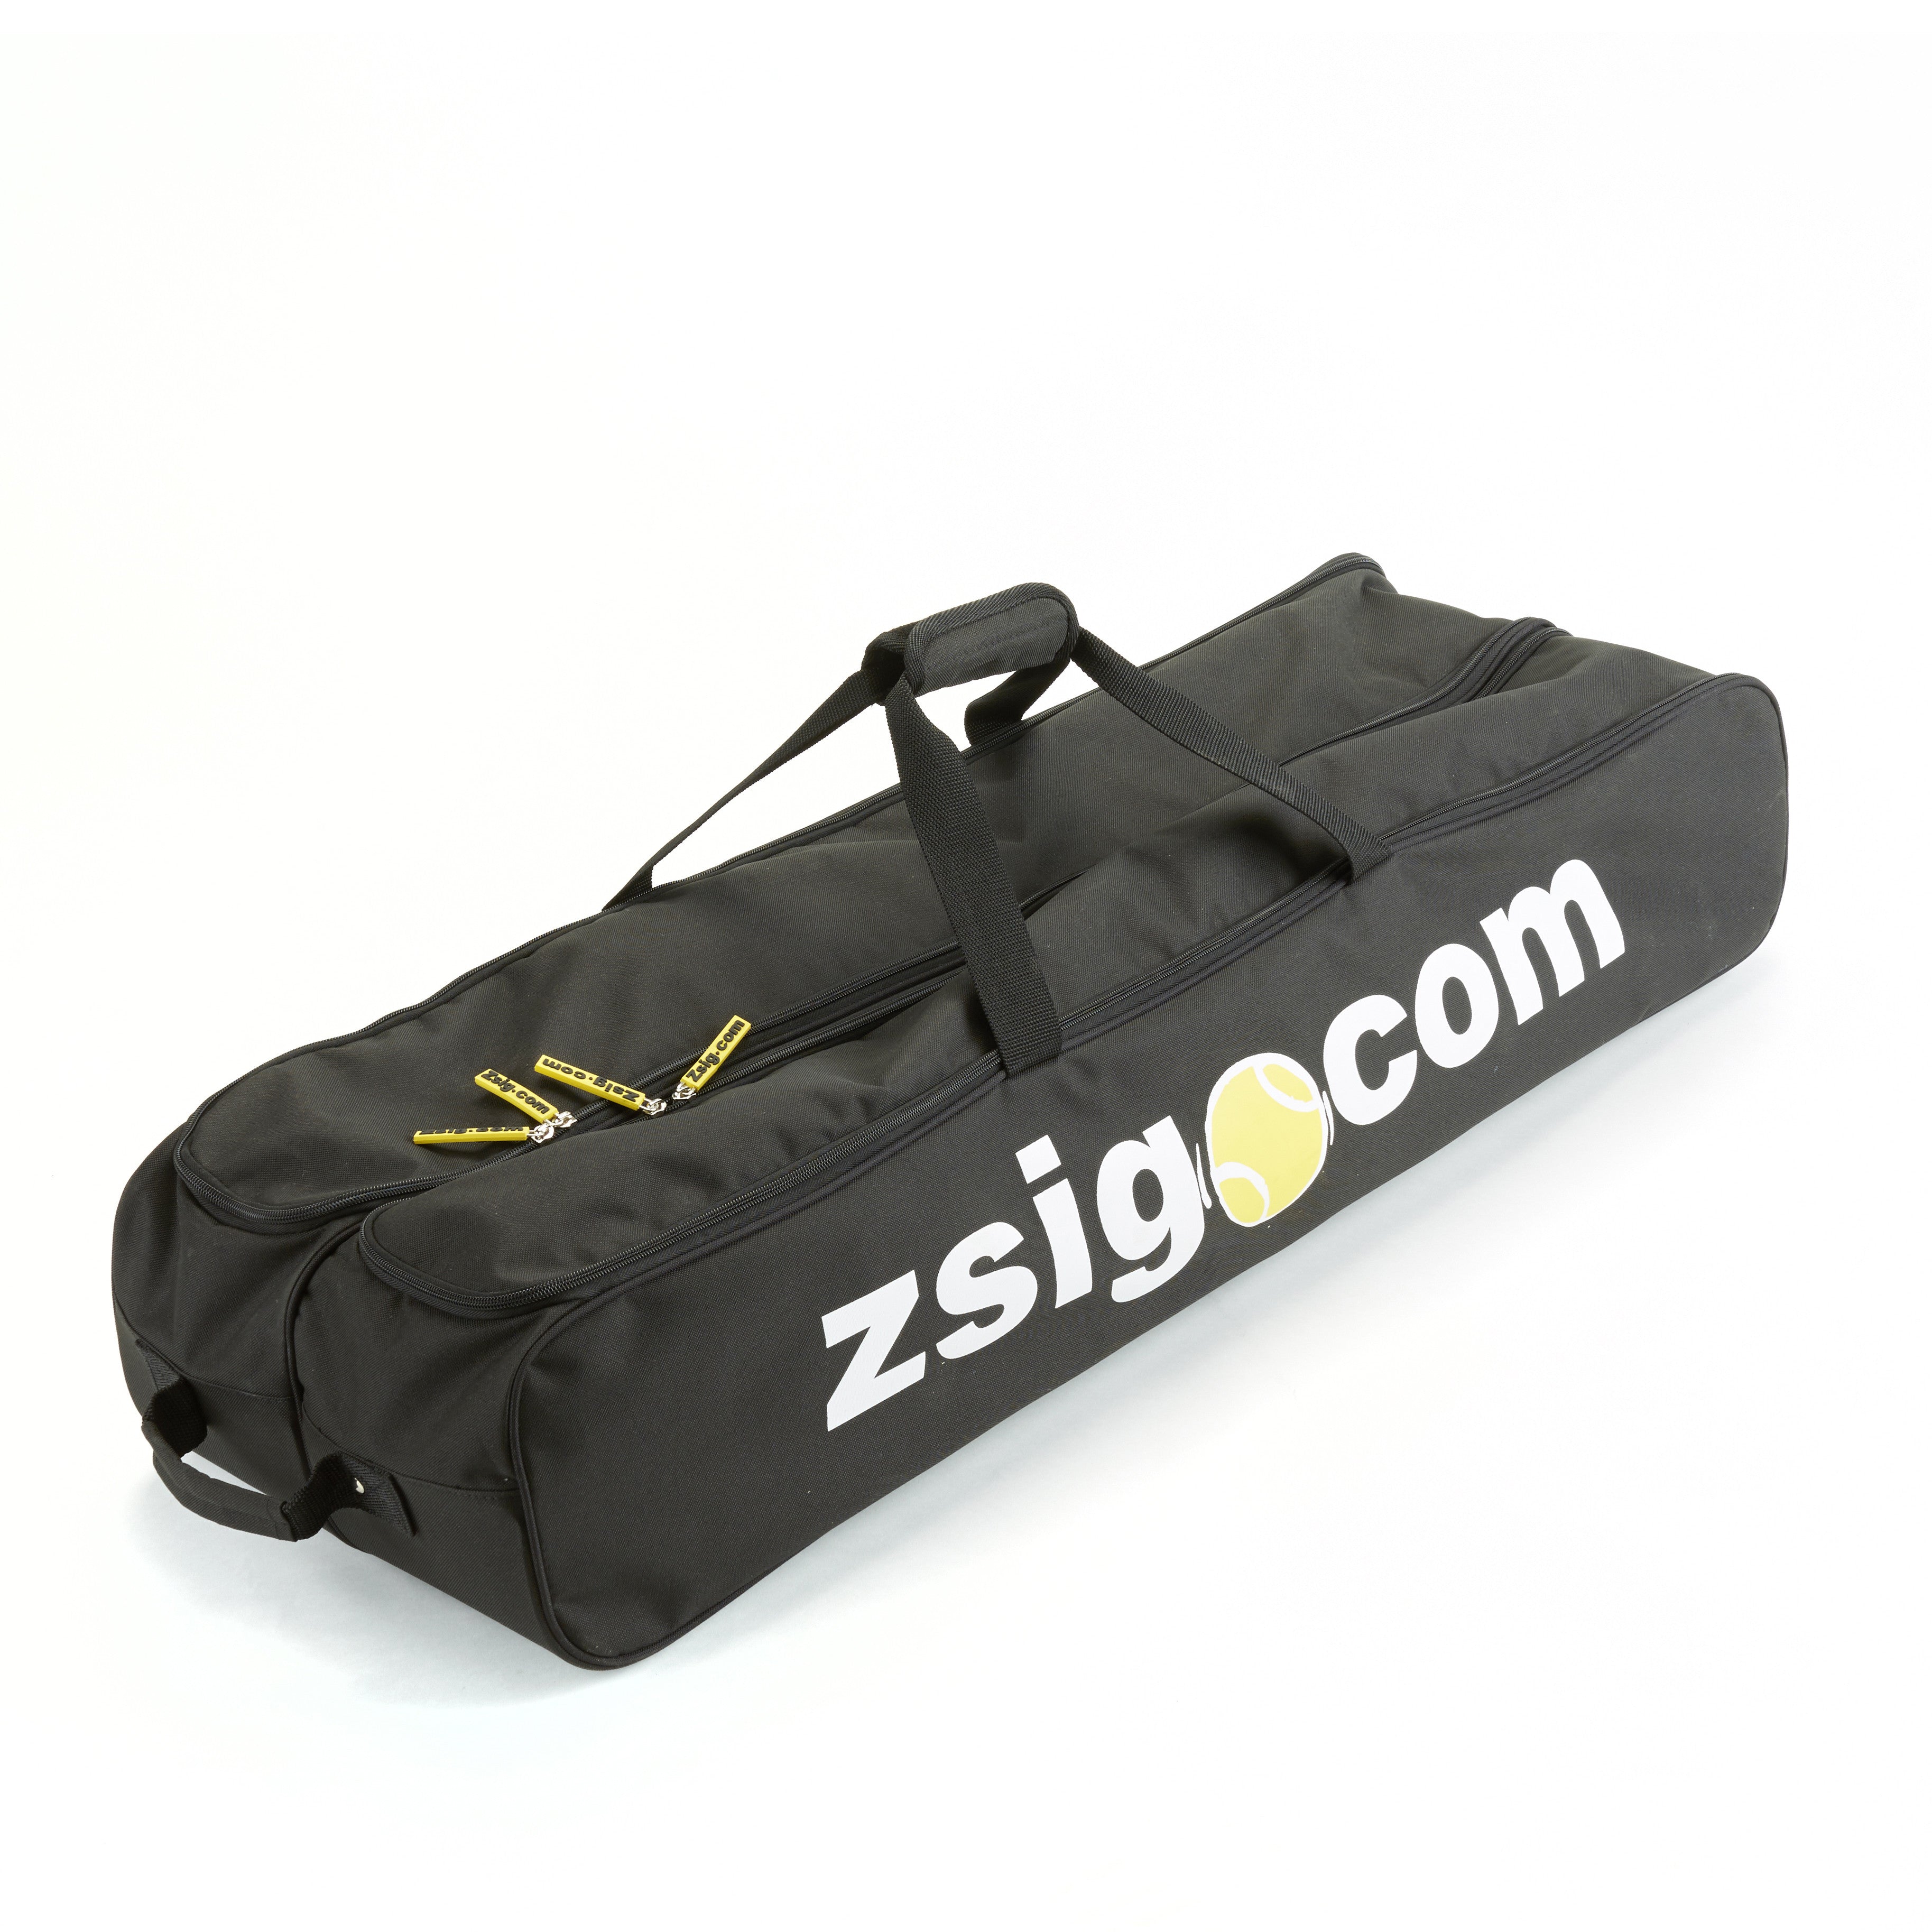  New double wheeled holdall for two Zsig 6m Mini Tennis Net Systems